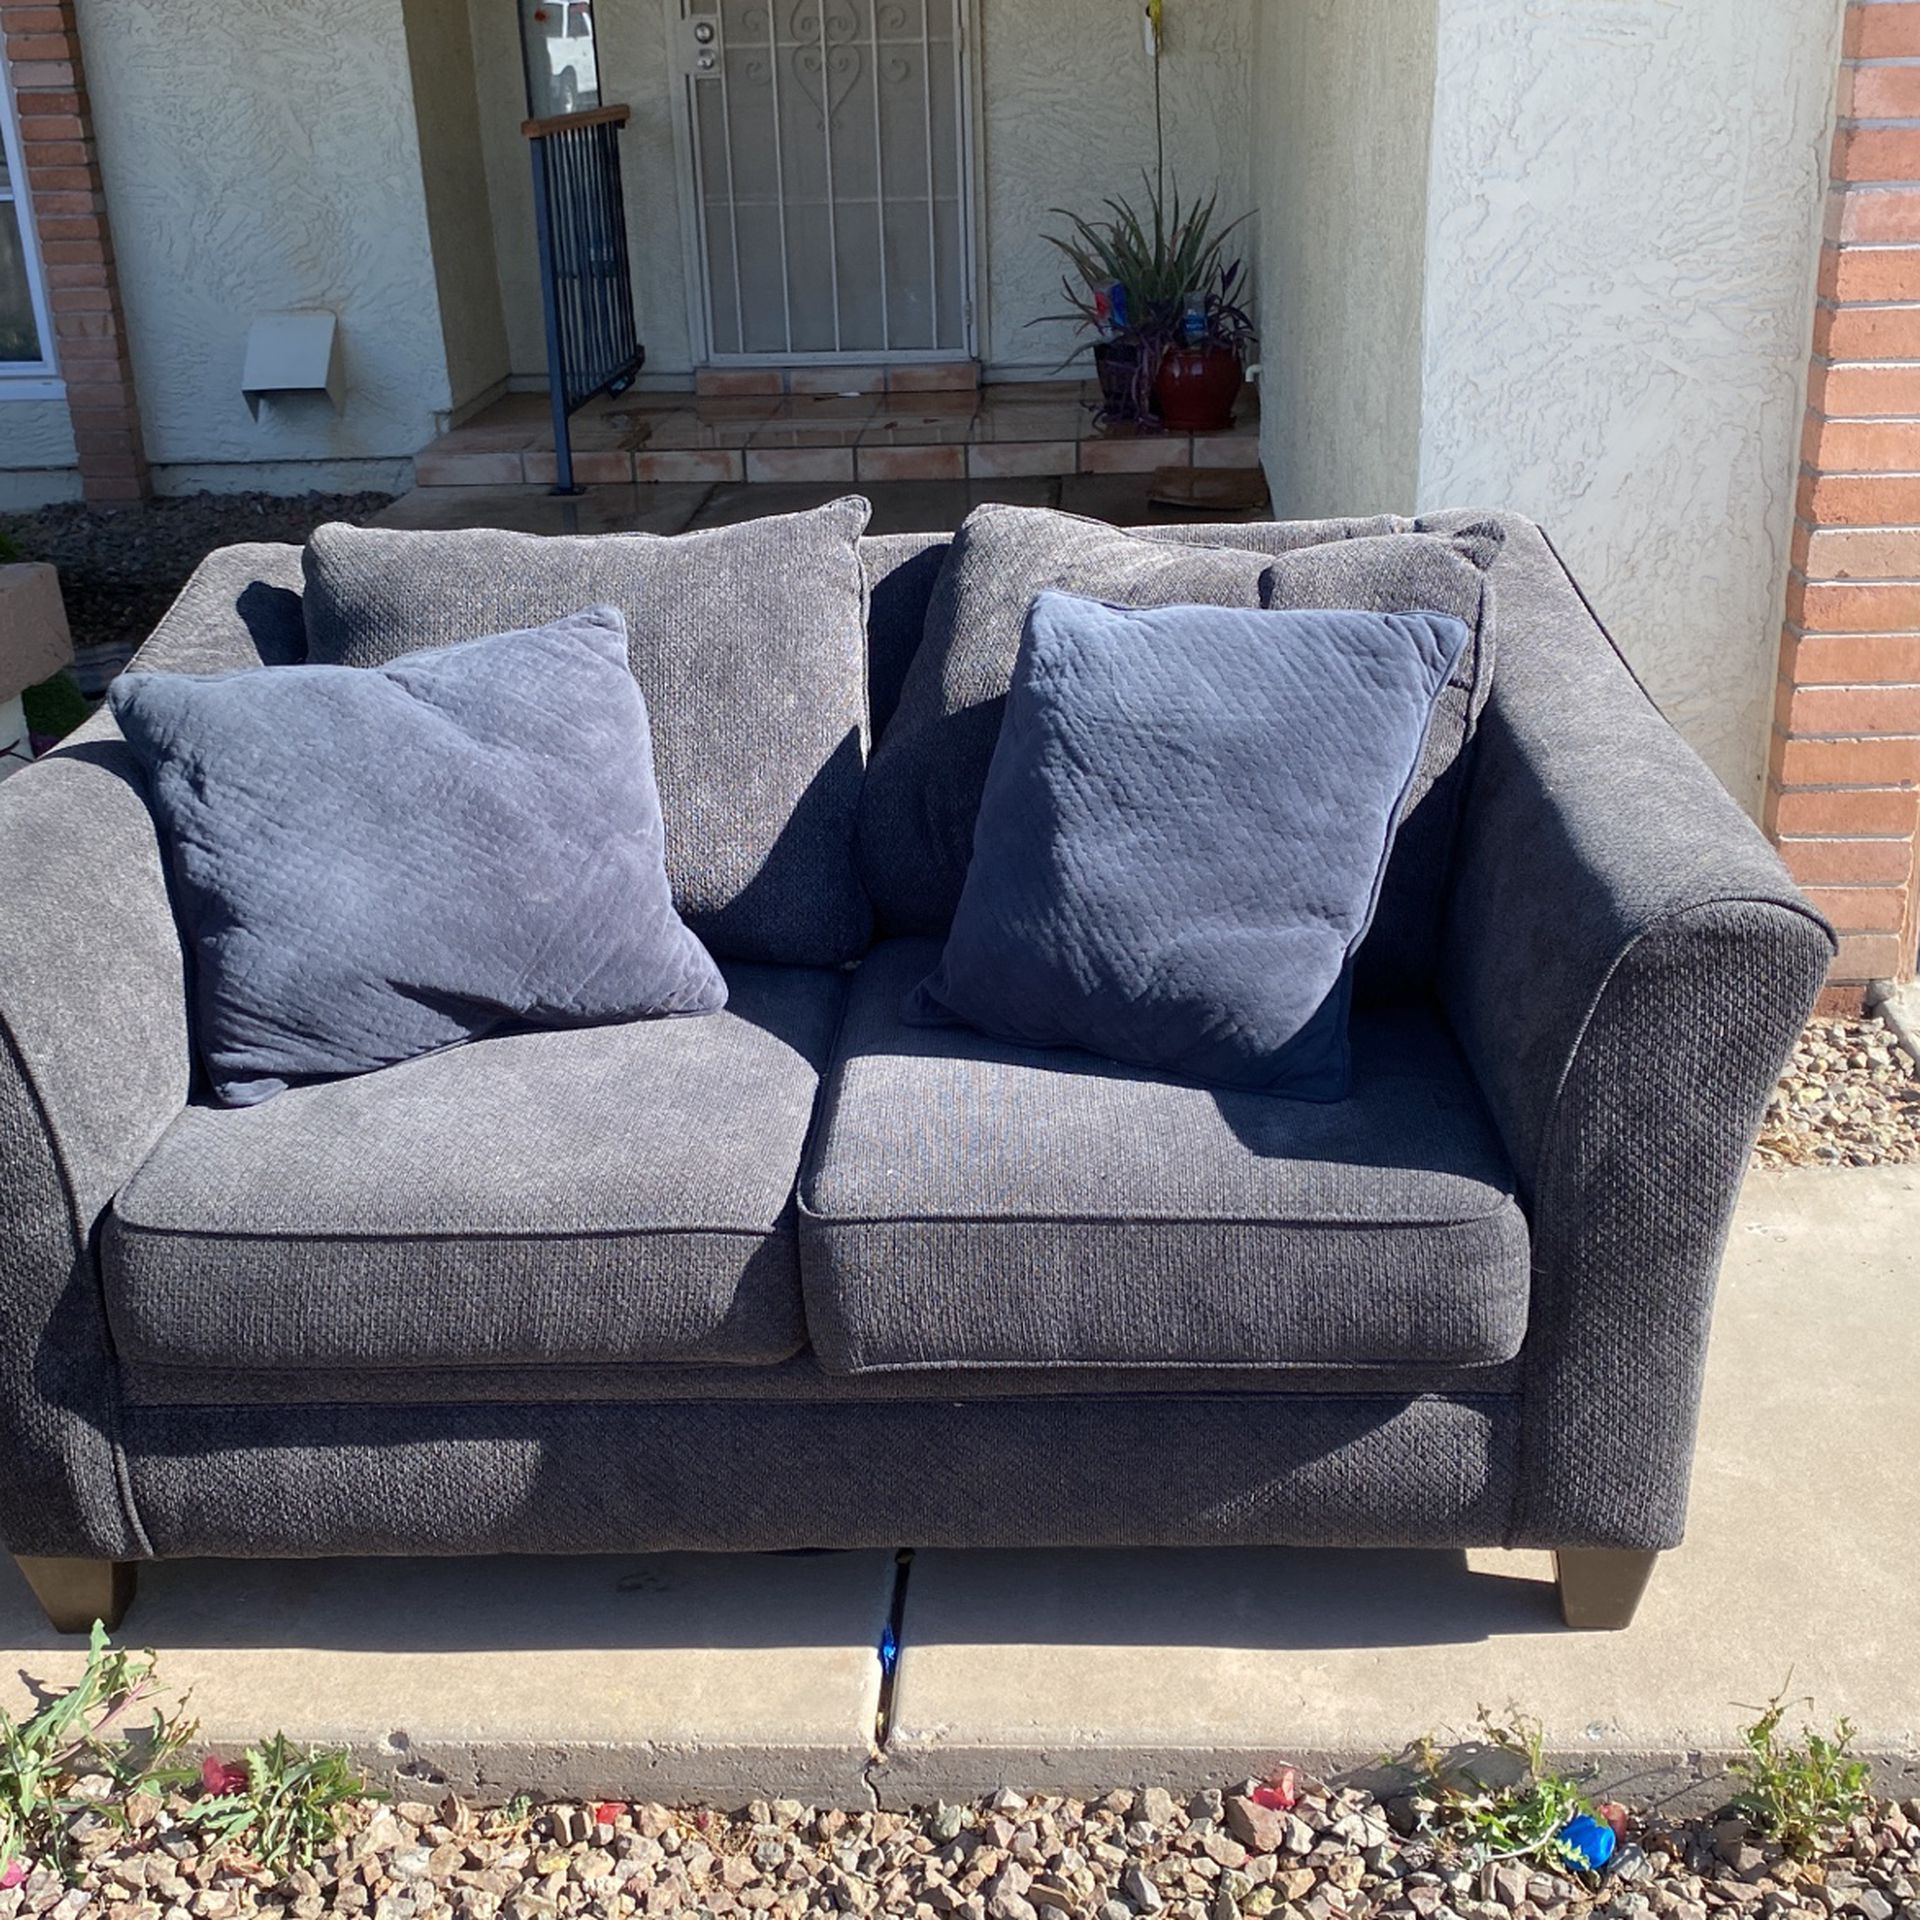 Couches For Sale 80$ For 1 Or 160$ For Both!